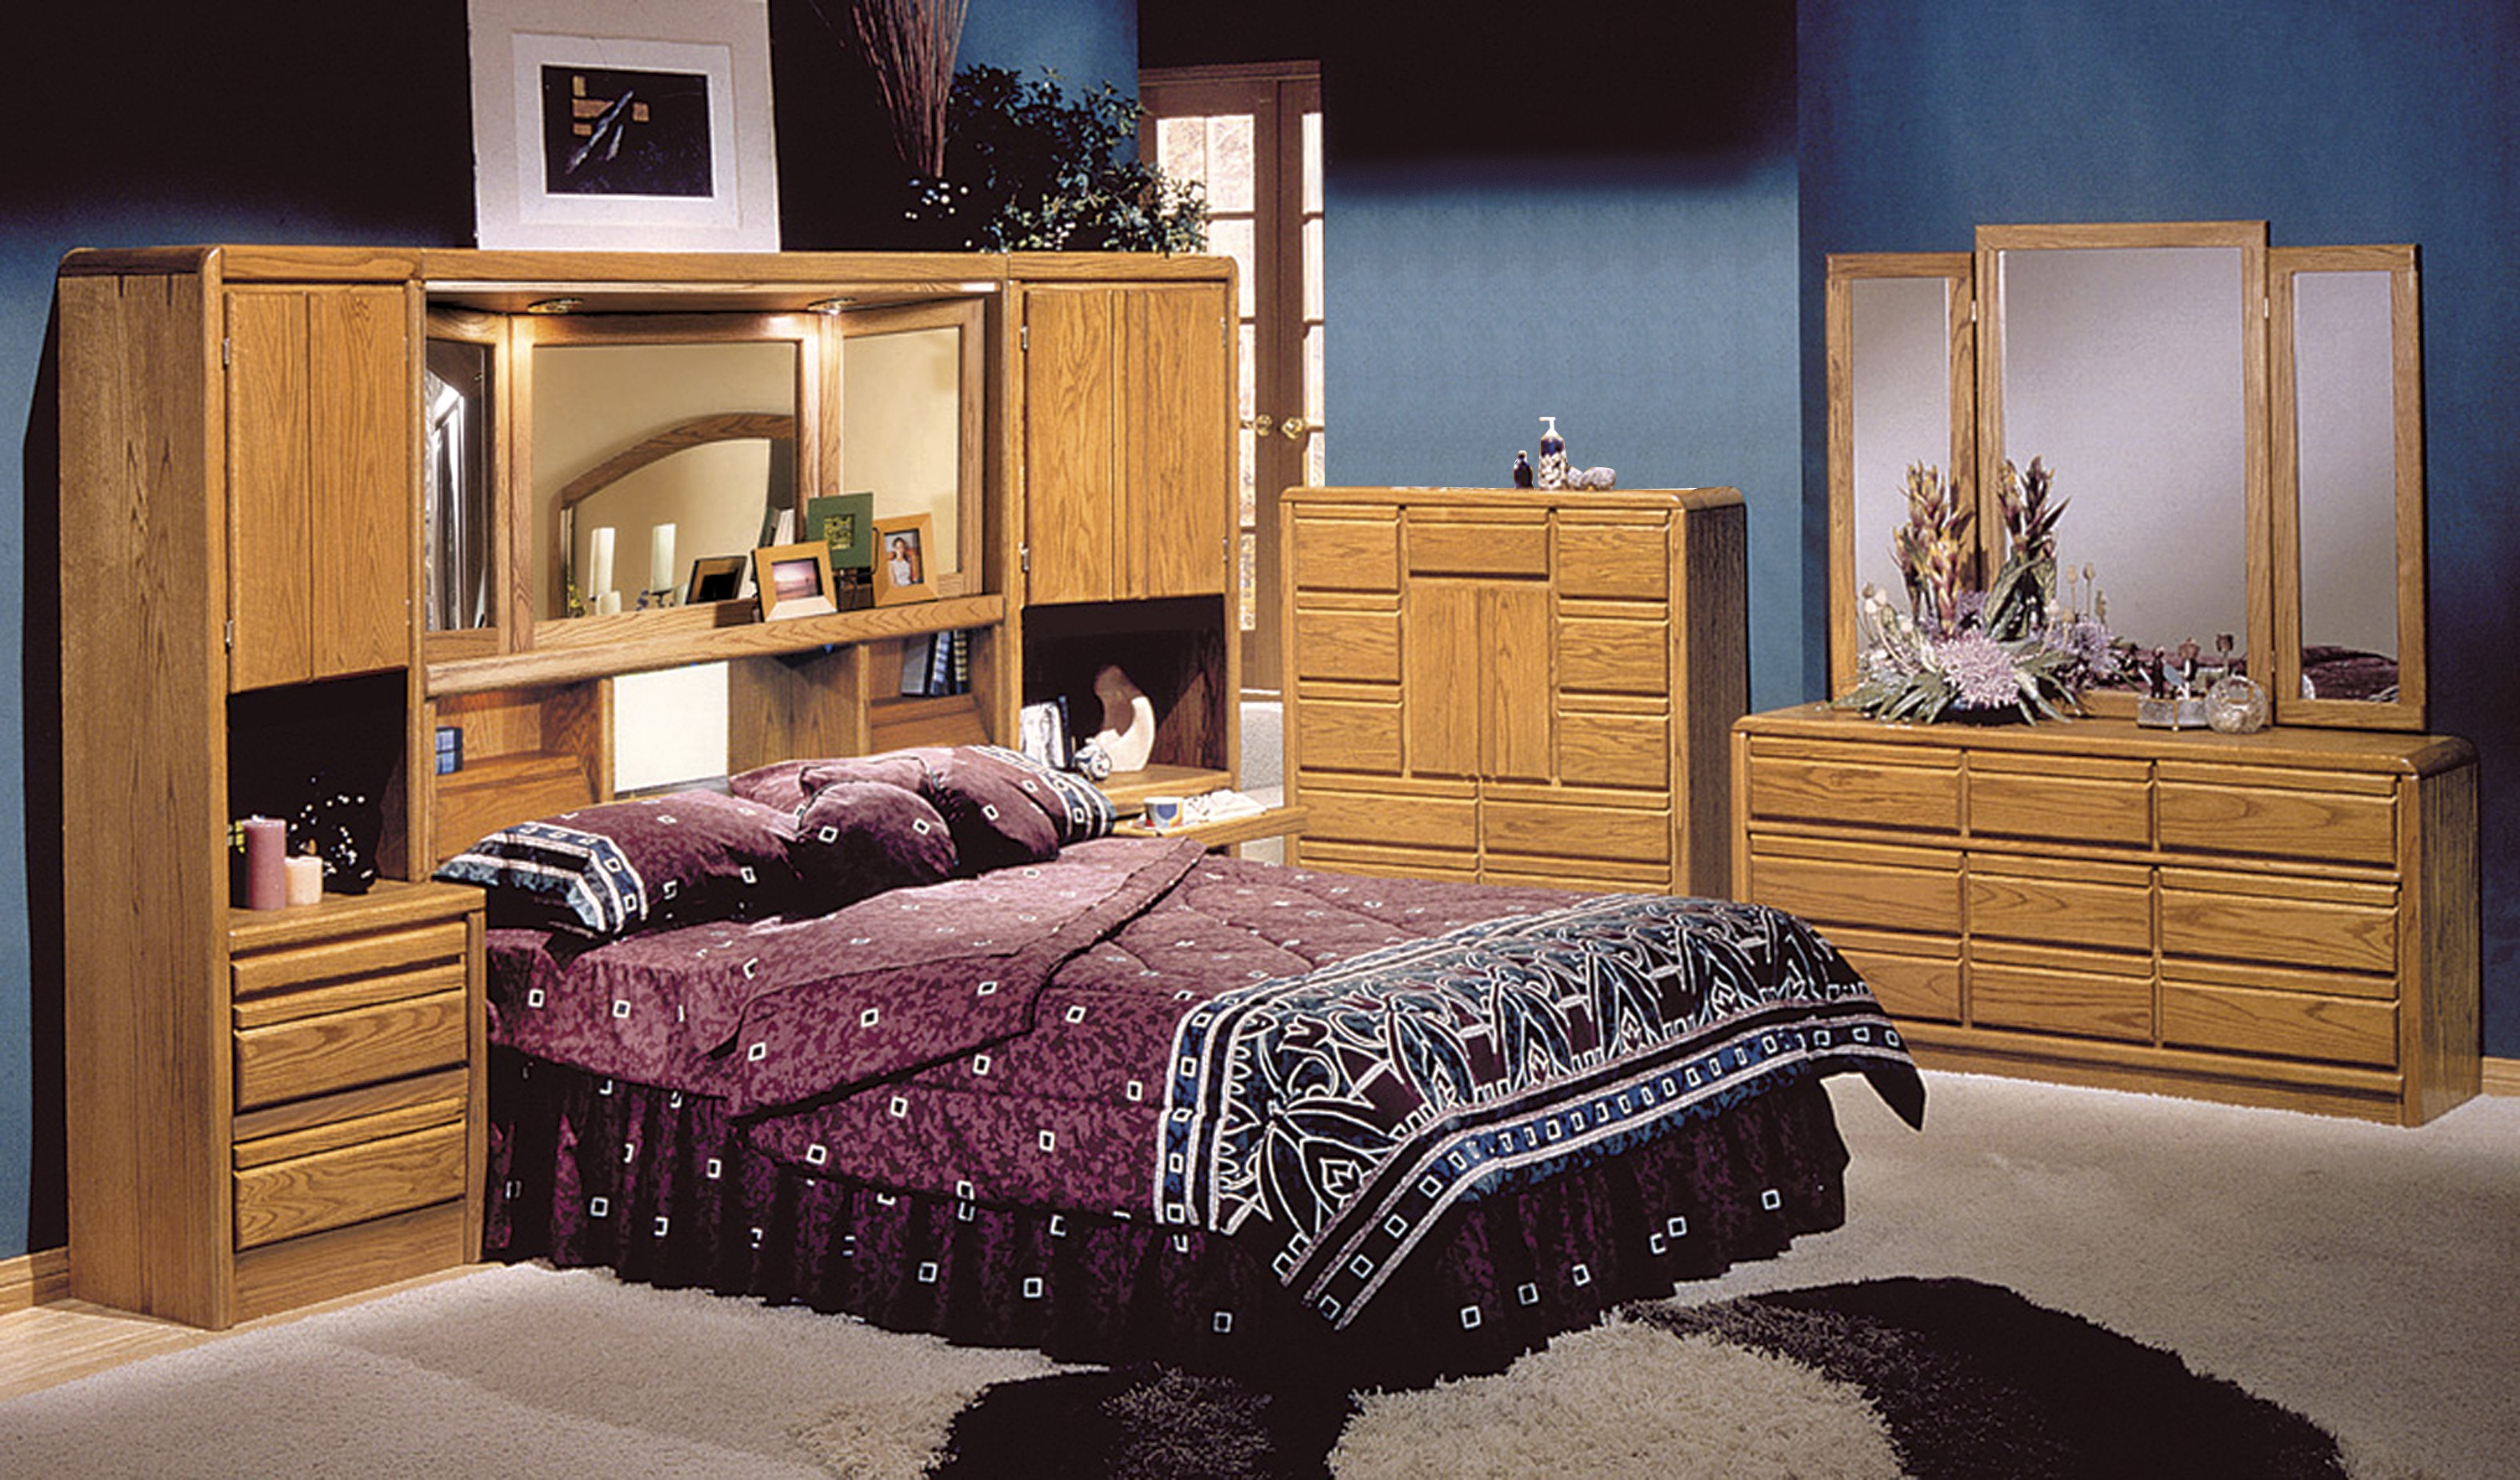 Venice Wall Unit Beds Master Bedroom Bedroom Furniture Master intended for dimensions 3150 X 1850